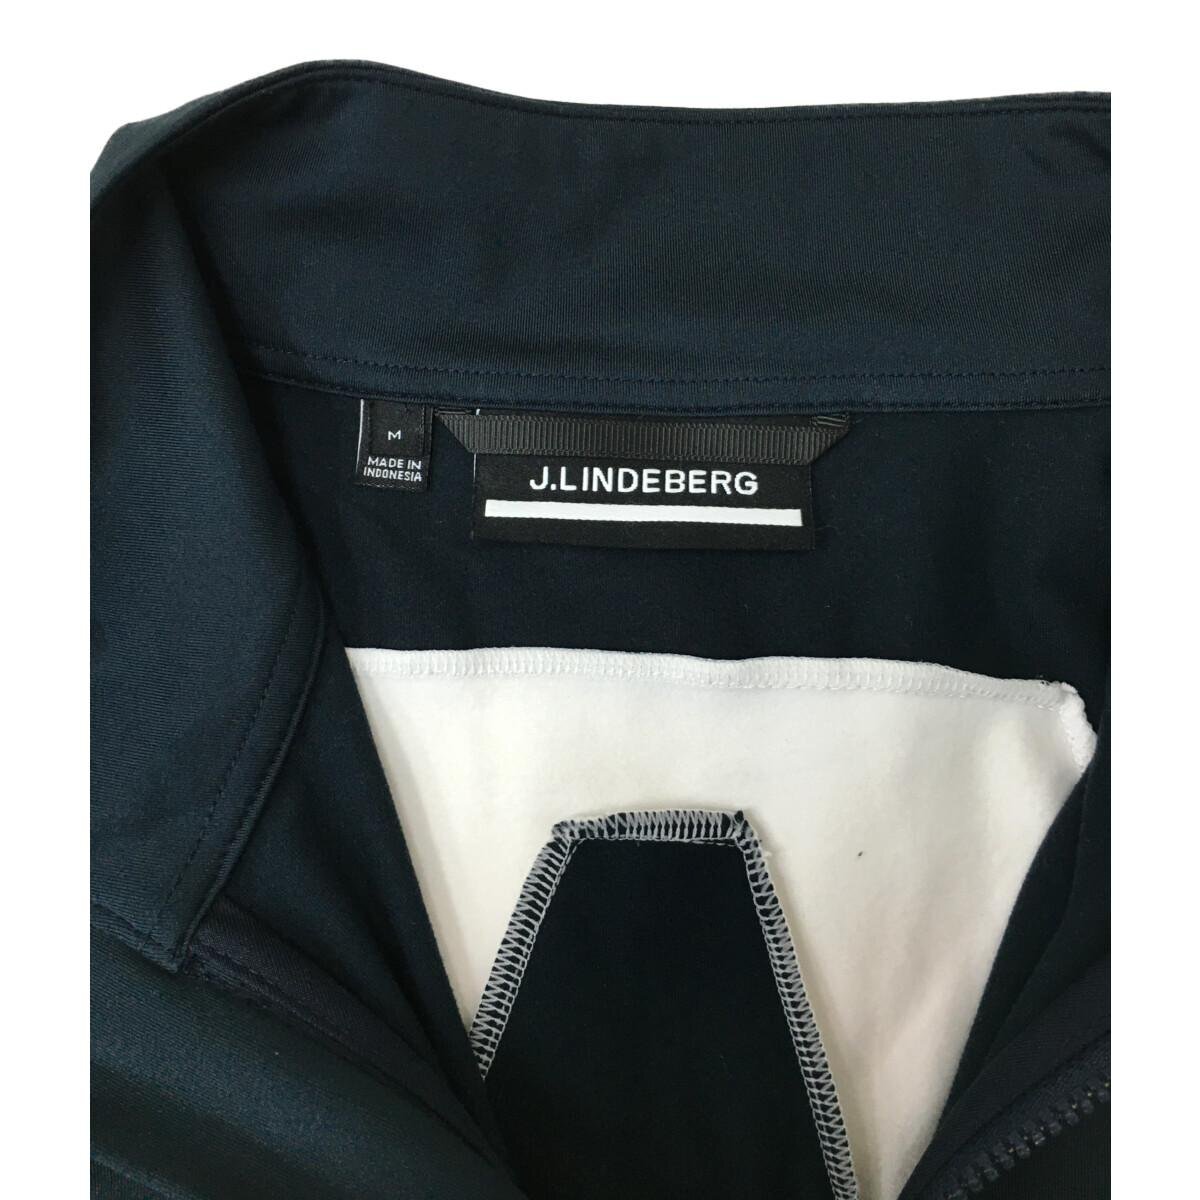 coco*J. Lindberg * long sleeve double Zip blouson * thin * stretch * reverse side the smallest nappy * navy blue × white *M* used * letter pack post service plus shipping possible *88162